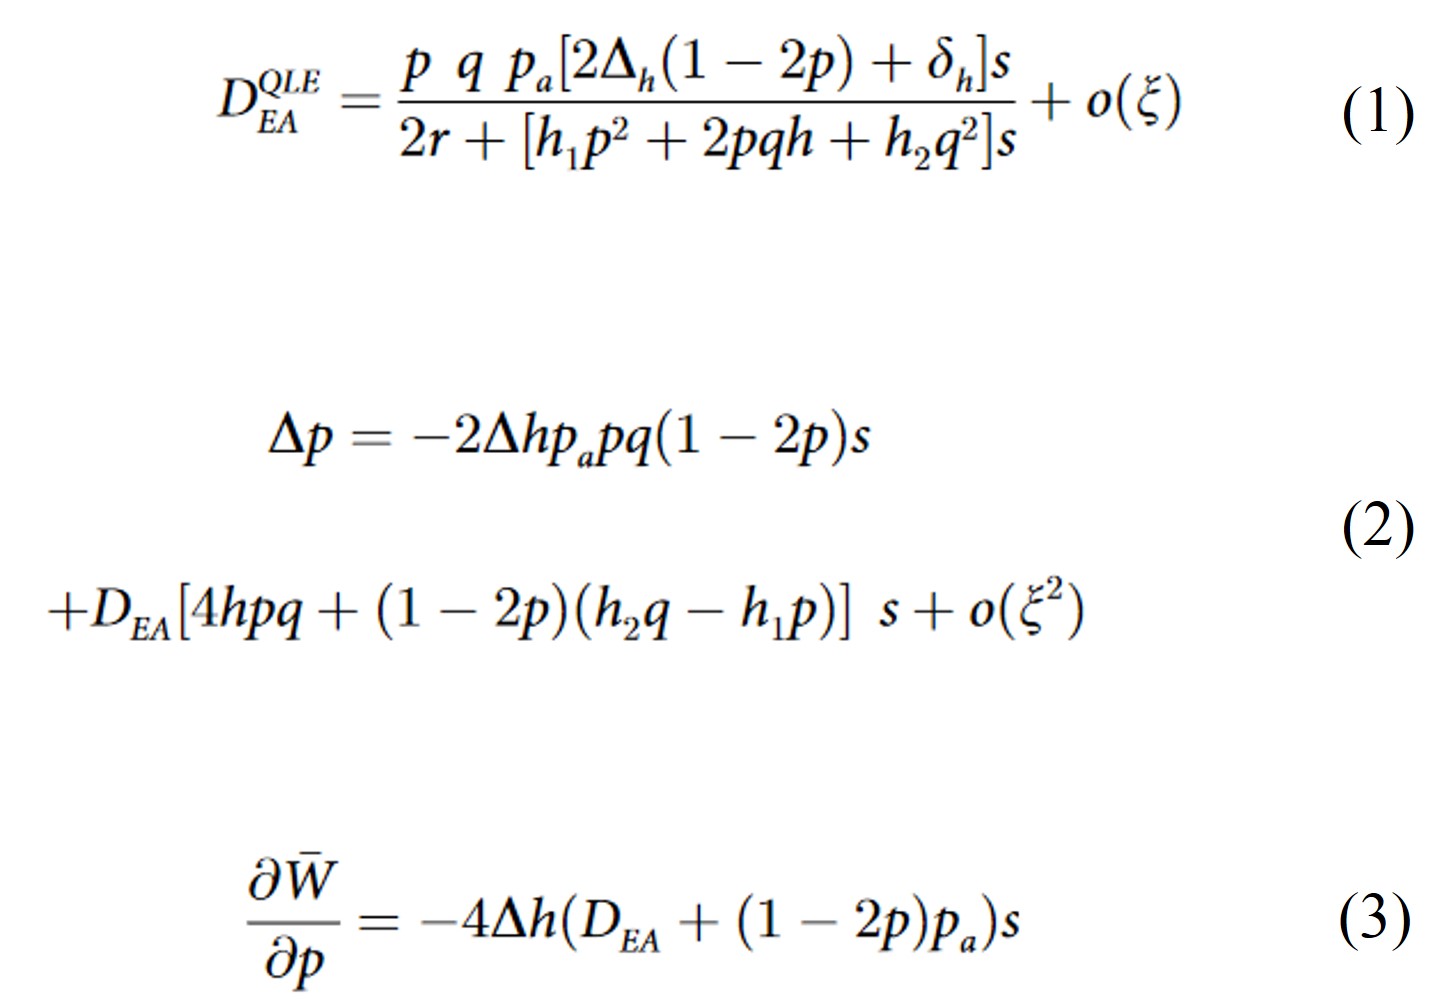 Meaningful equations of the model.